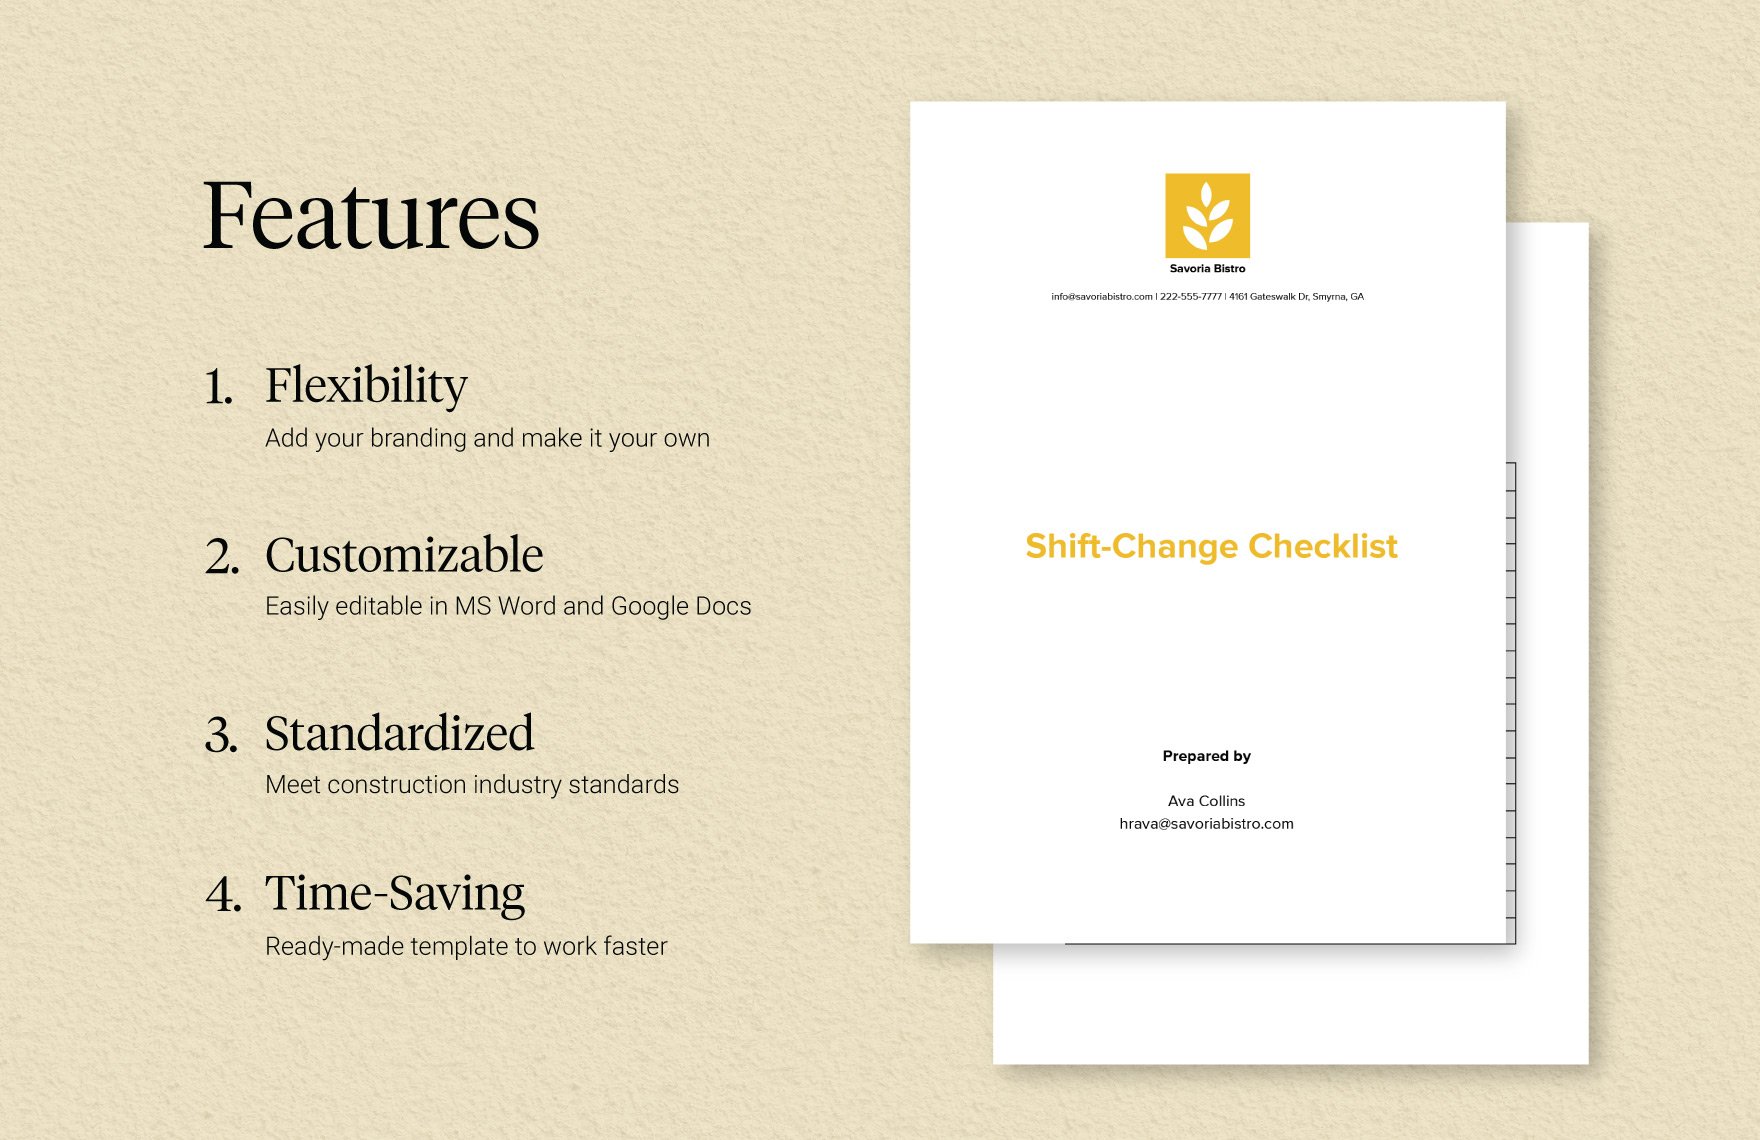 Restaurant Manager's Shift Card Template - Download in Word